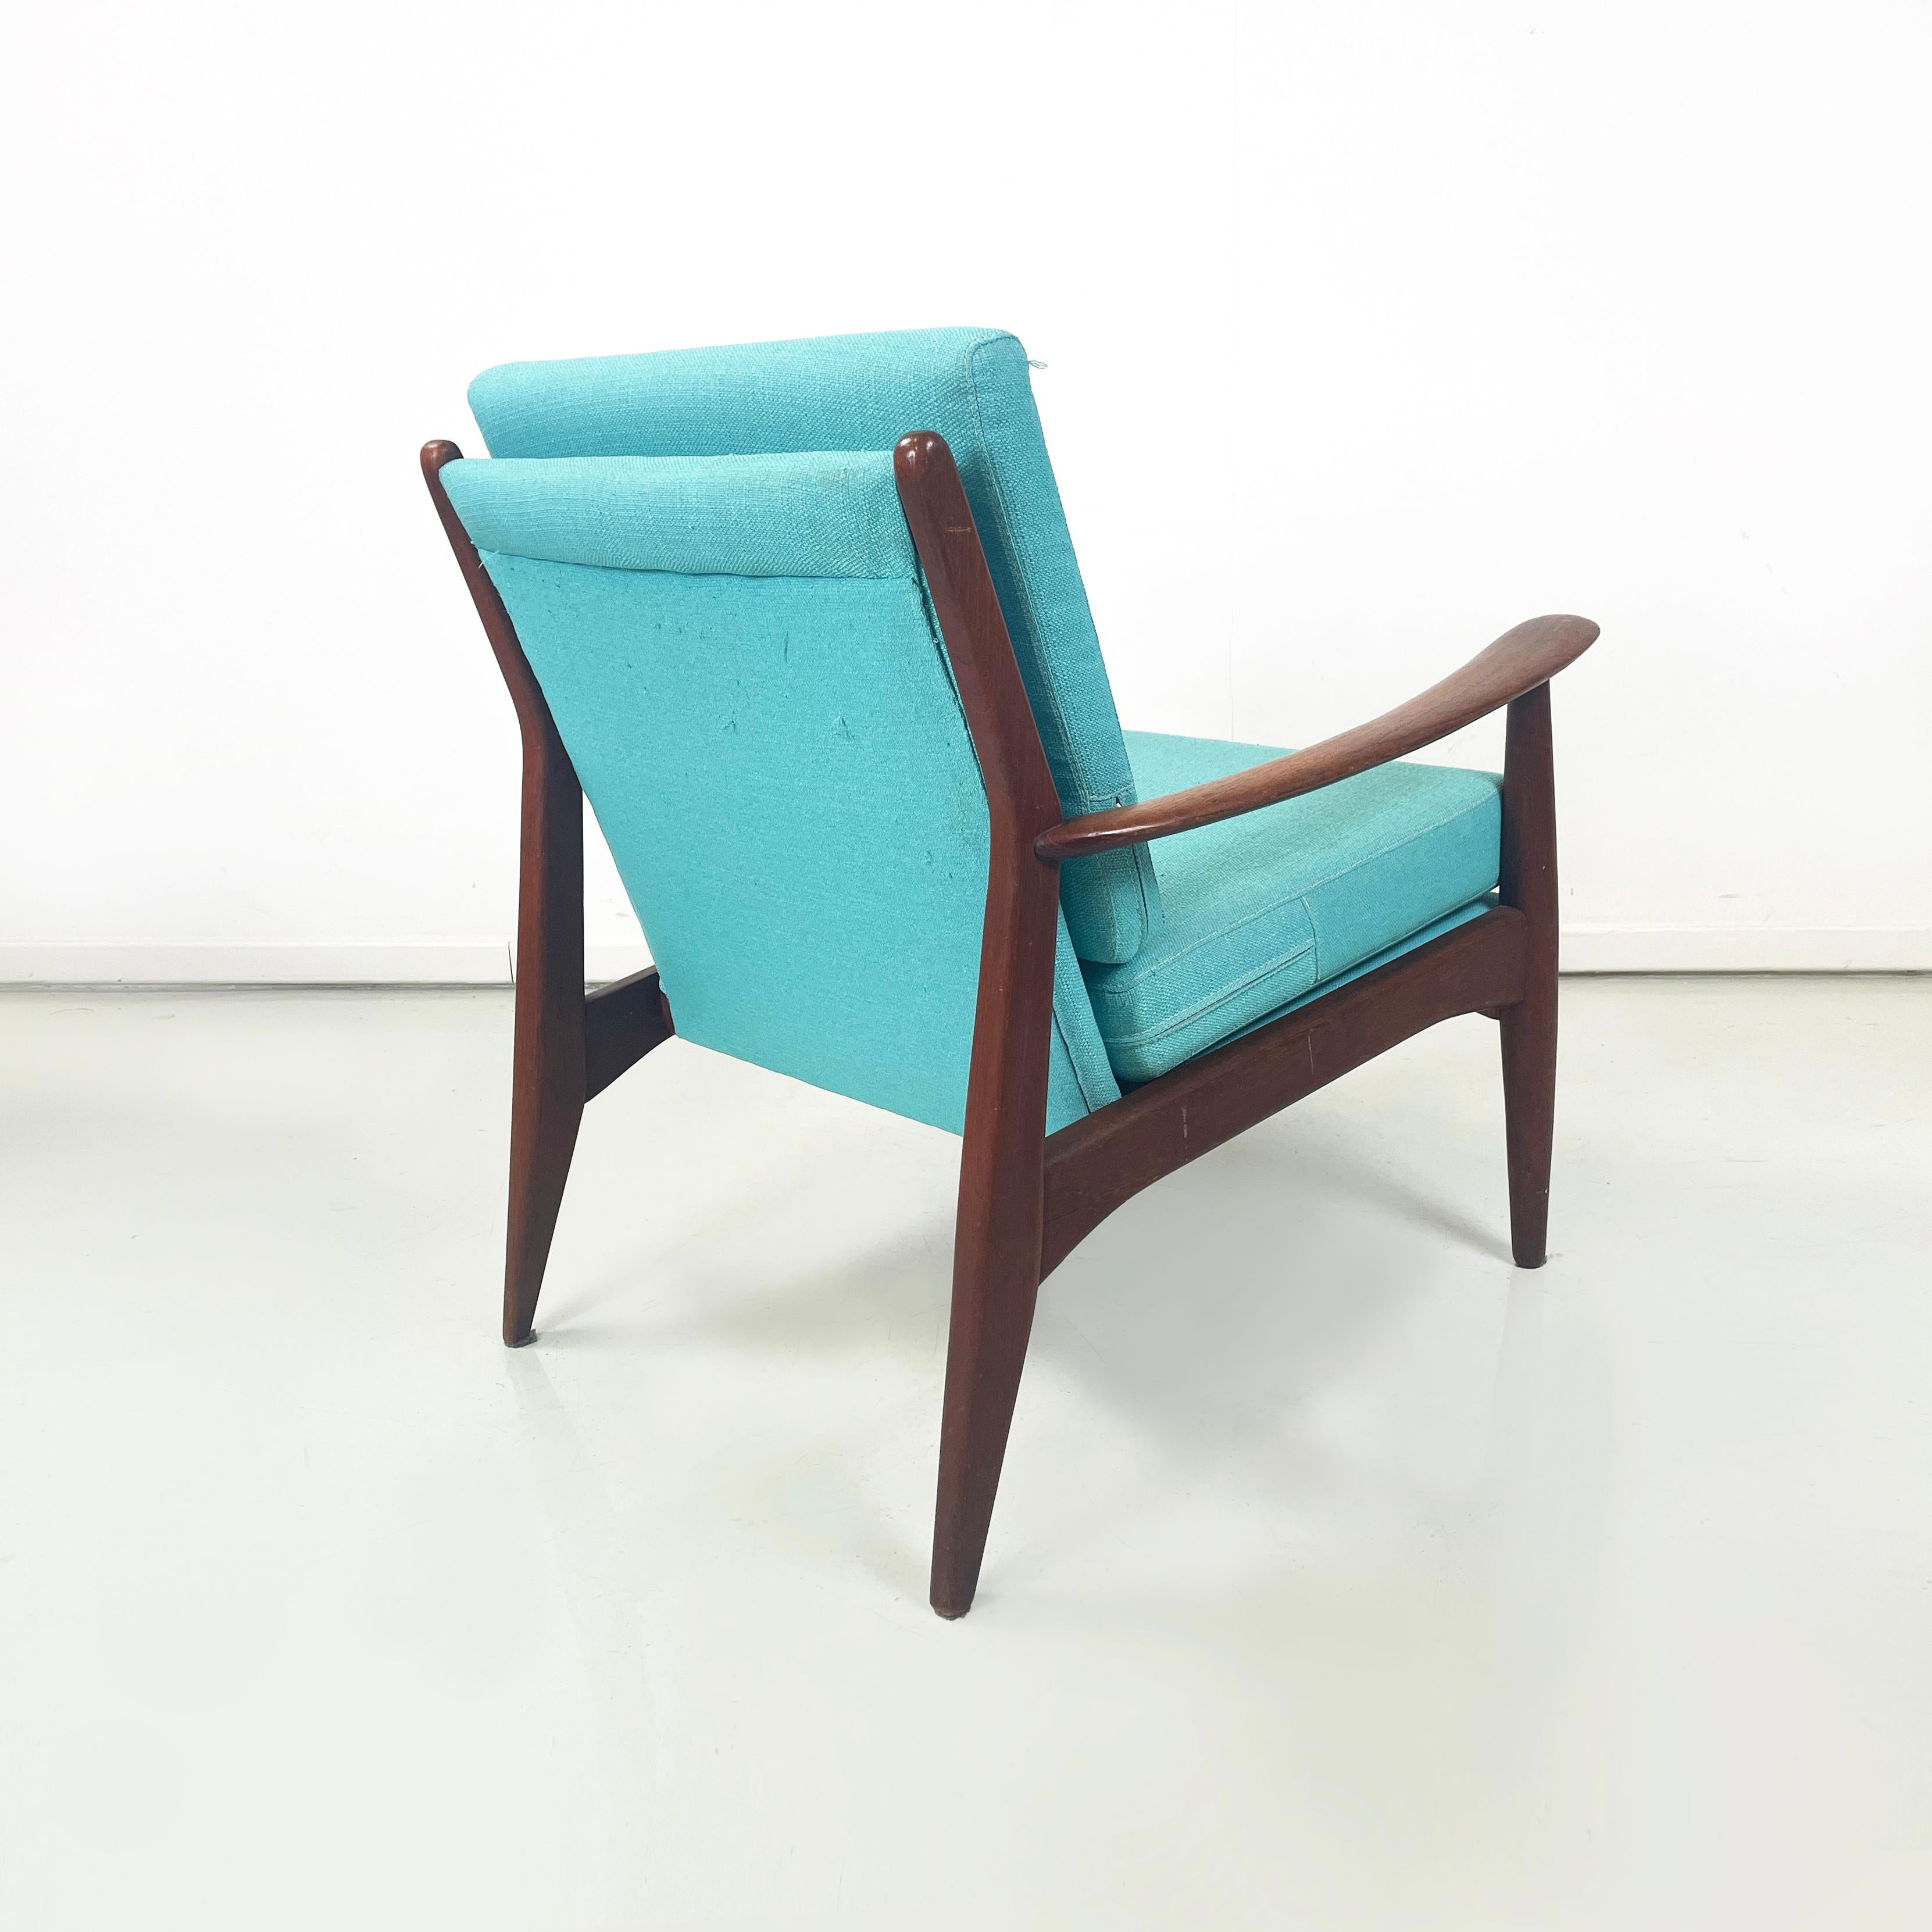 Mid-20th Century European mid-century modern Armchairs in light blue fabric and wood, 1960s For Sale